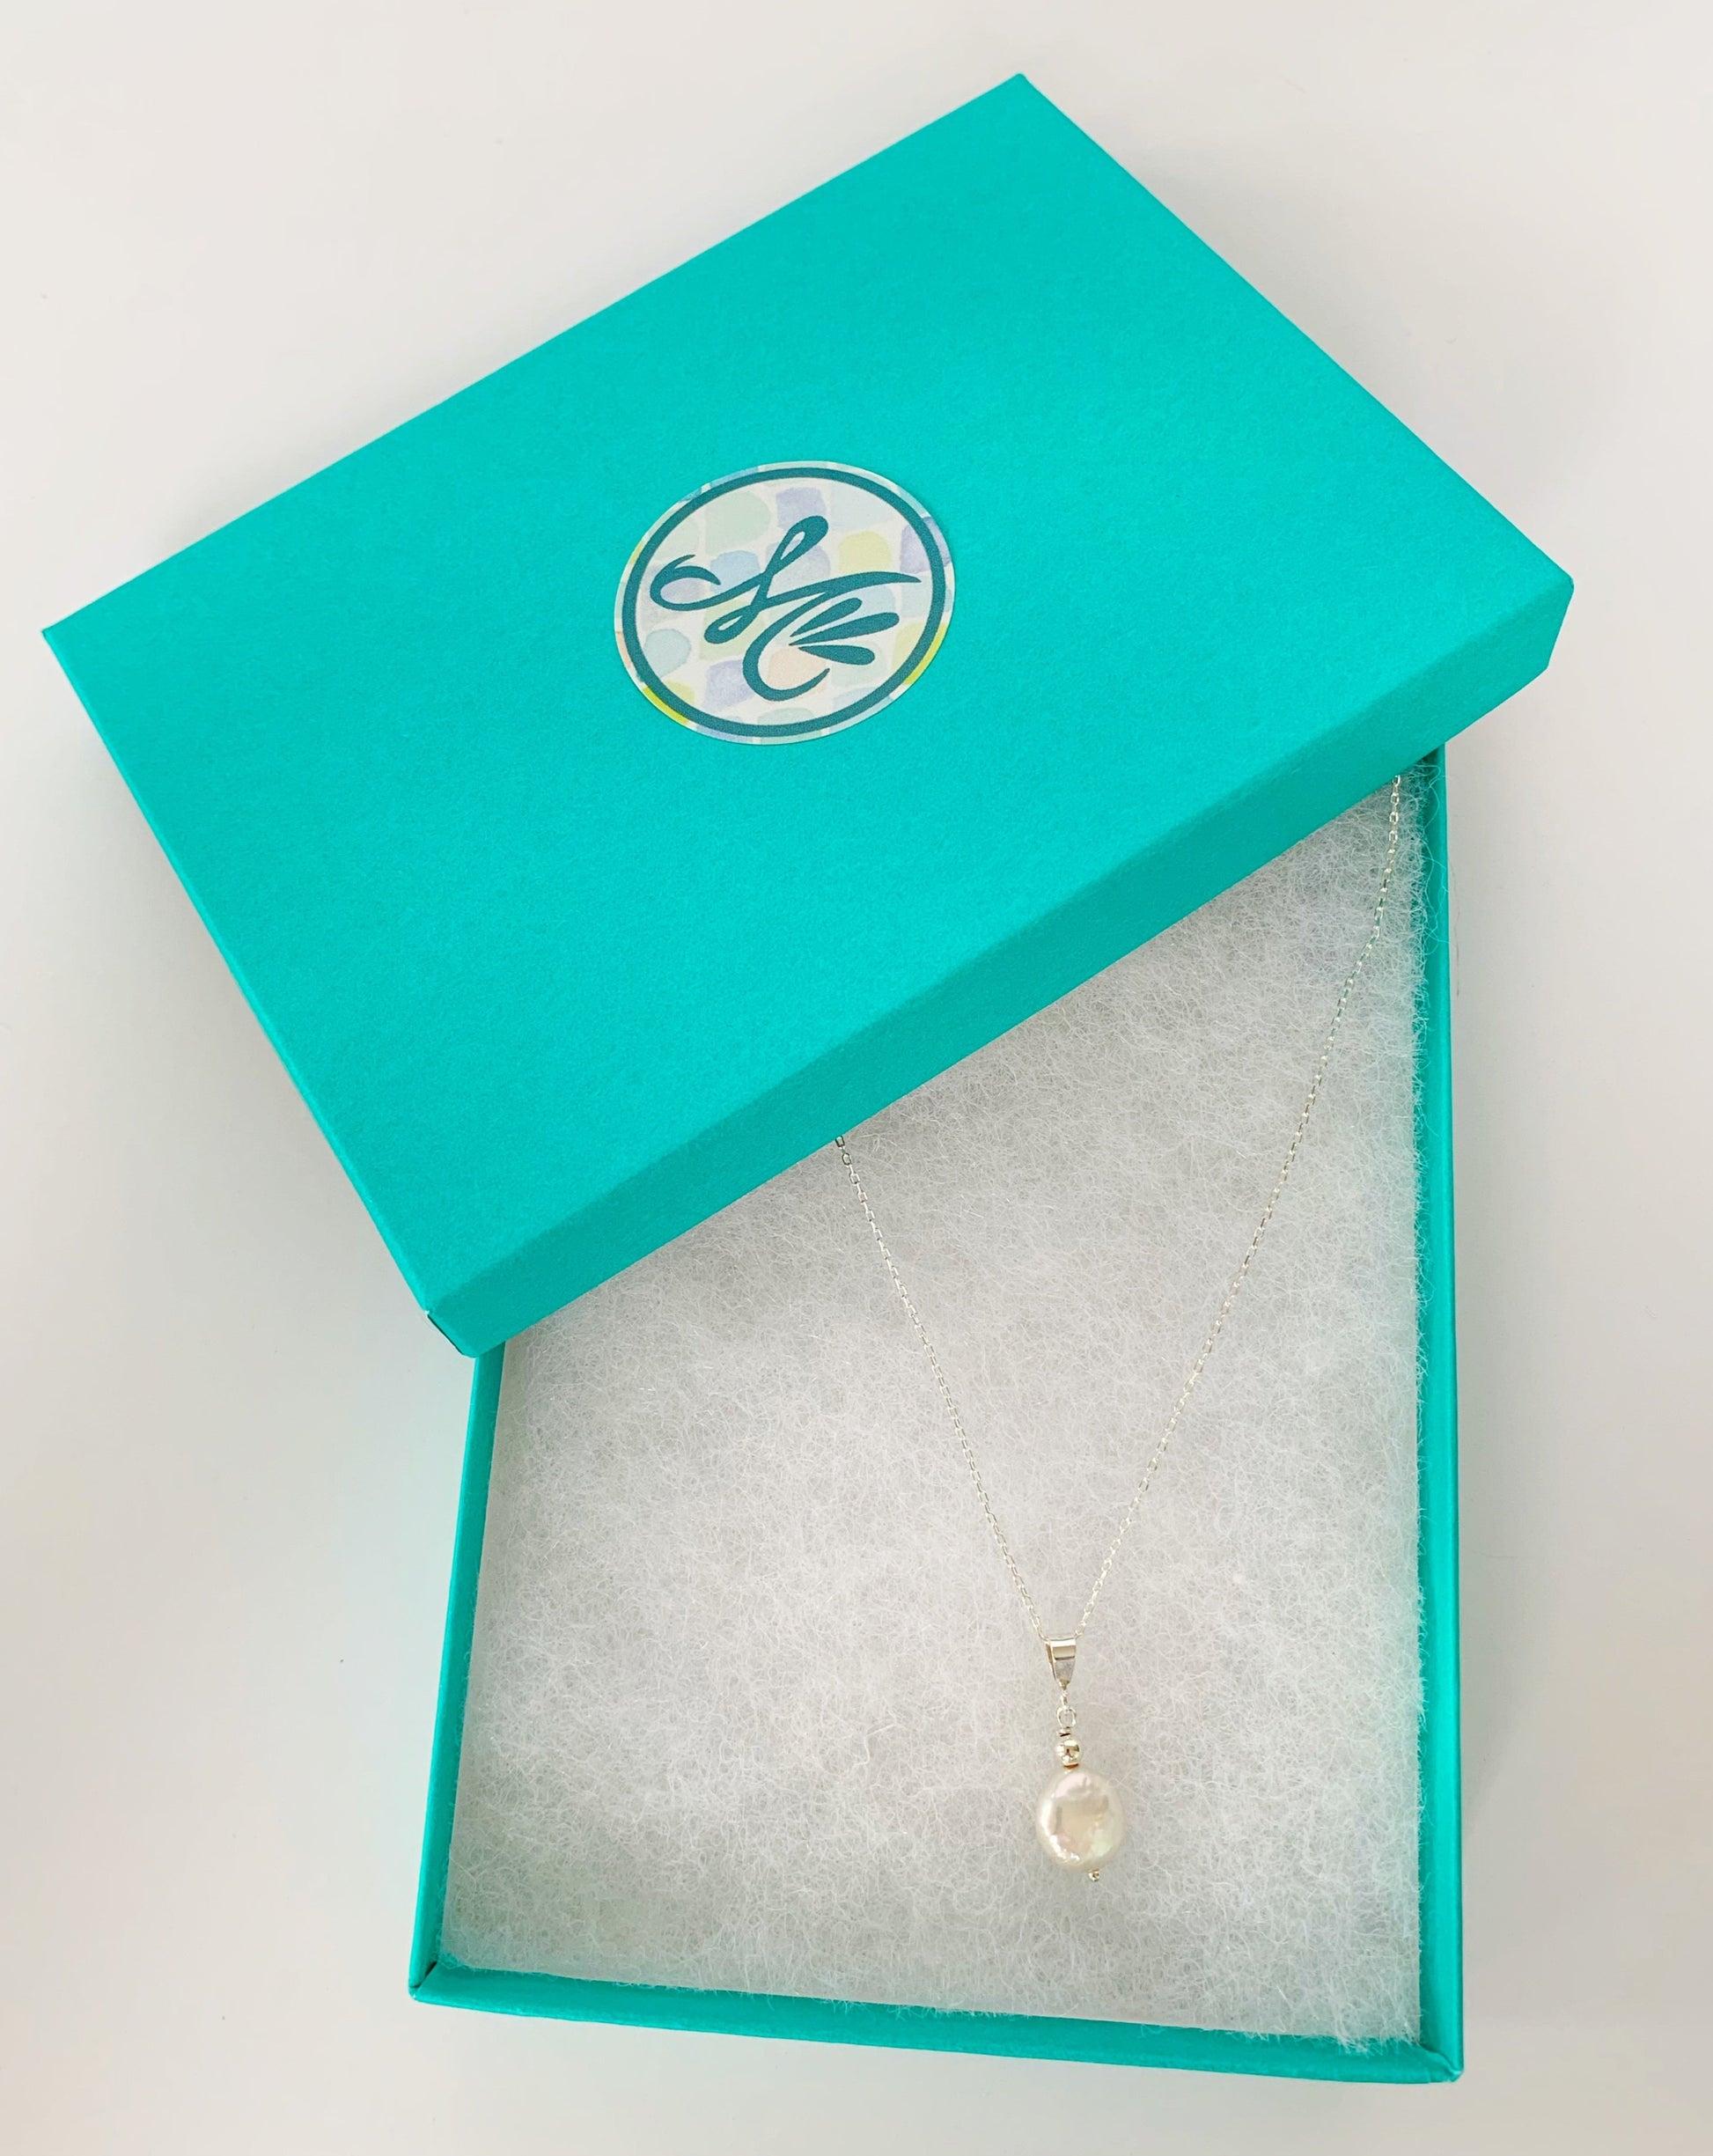 The Newport pendant necklace pictured in a cotton lined teal gift box with a mermaids and madeleines sticker on the lid. The necklace is created with a white freshwater coin pearl suspended from a sterling silver bail and chain. The item is photographed on a white background